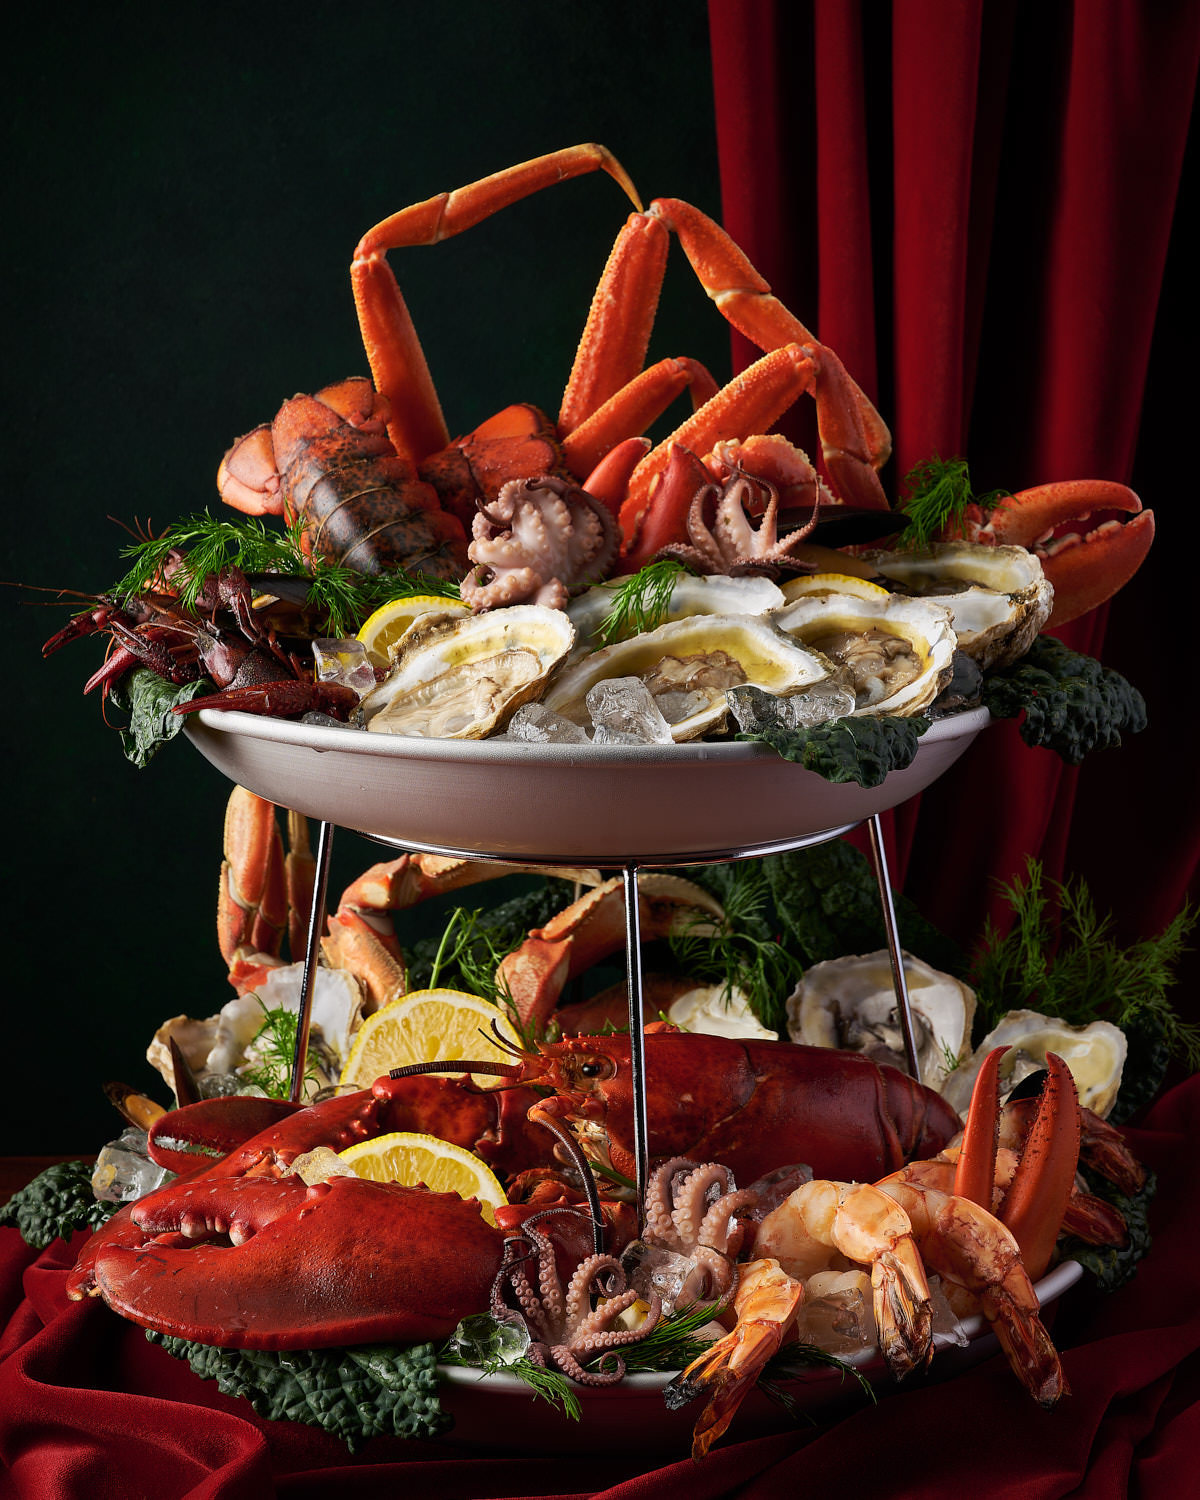 Editorial Food Photography of Delmonico's Seafood Tower